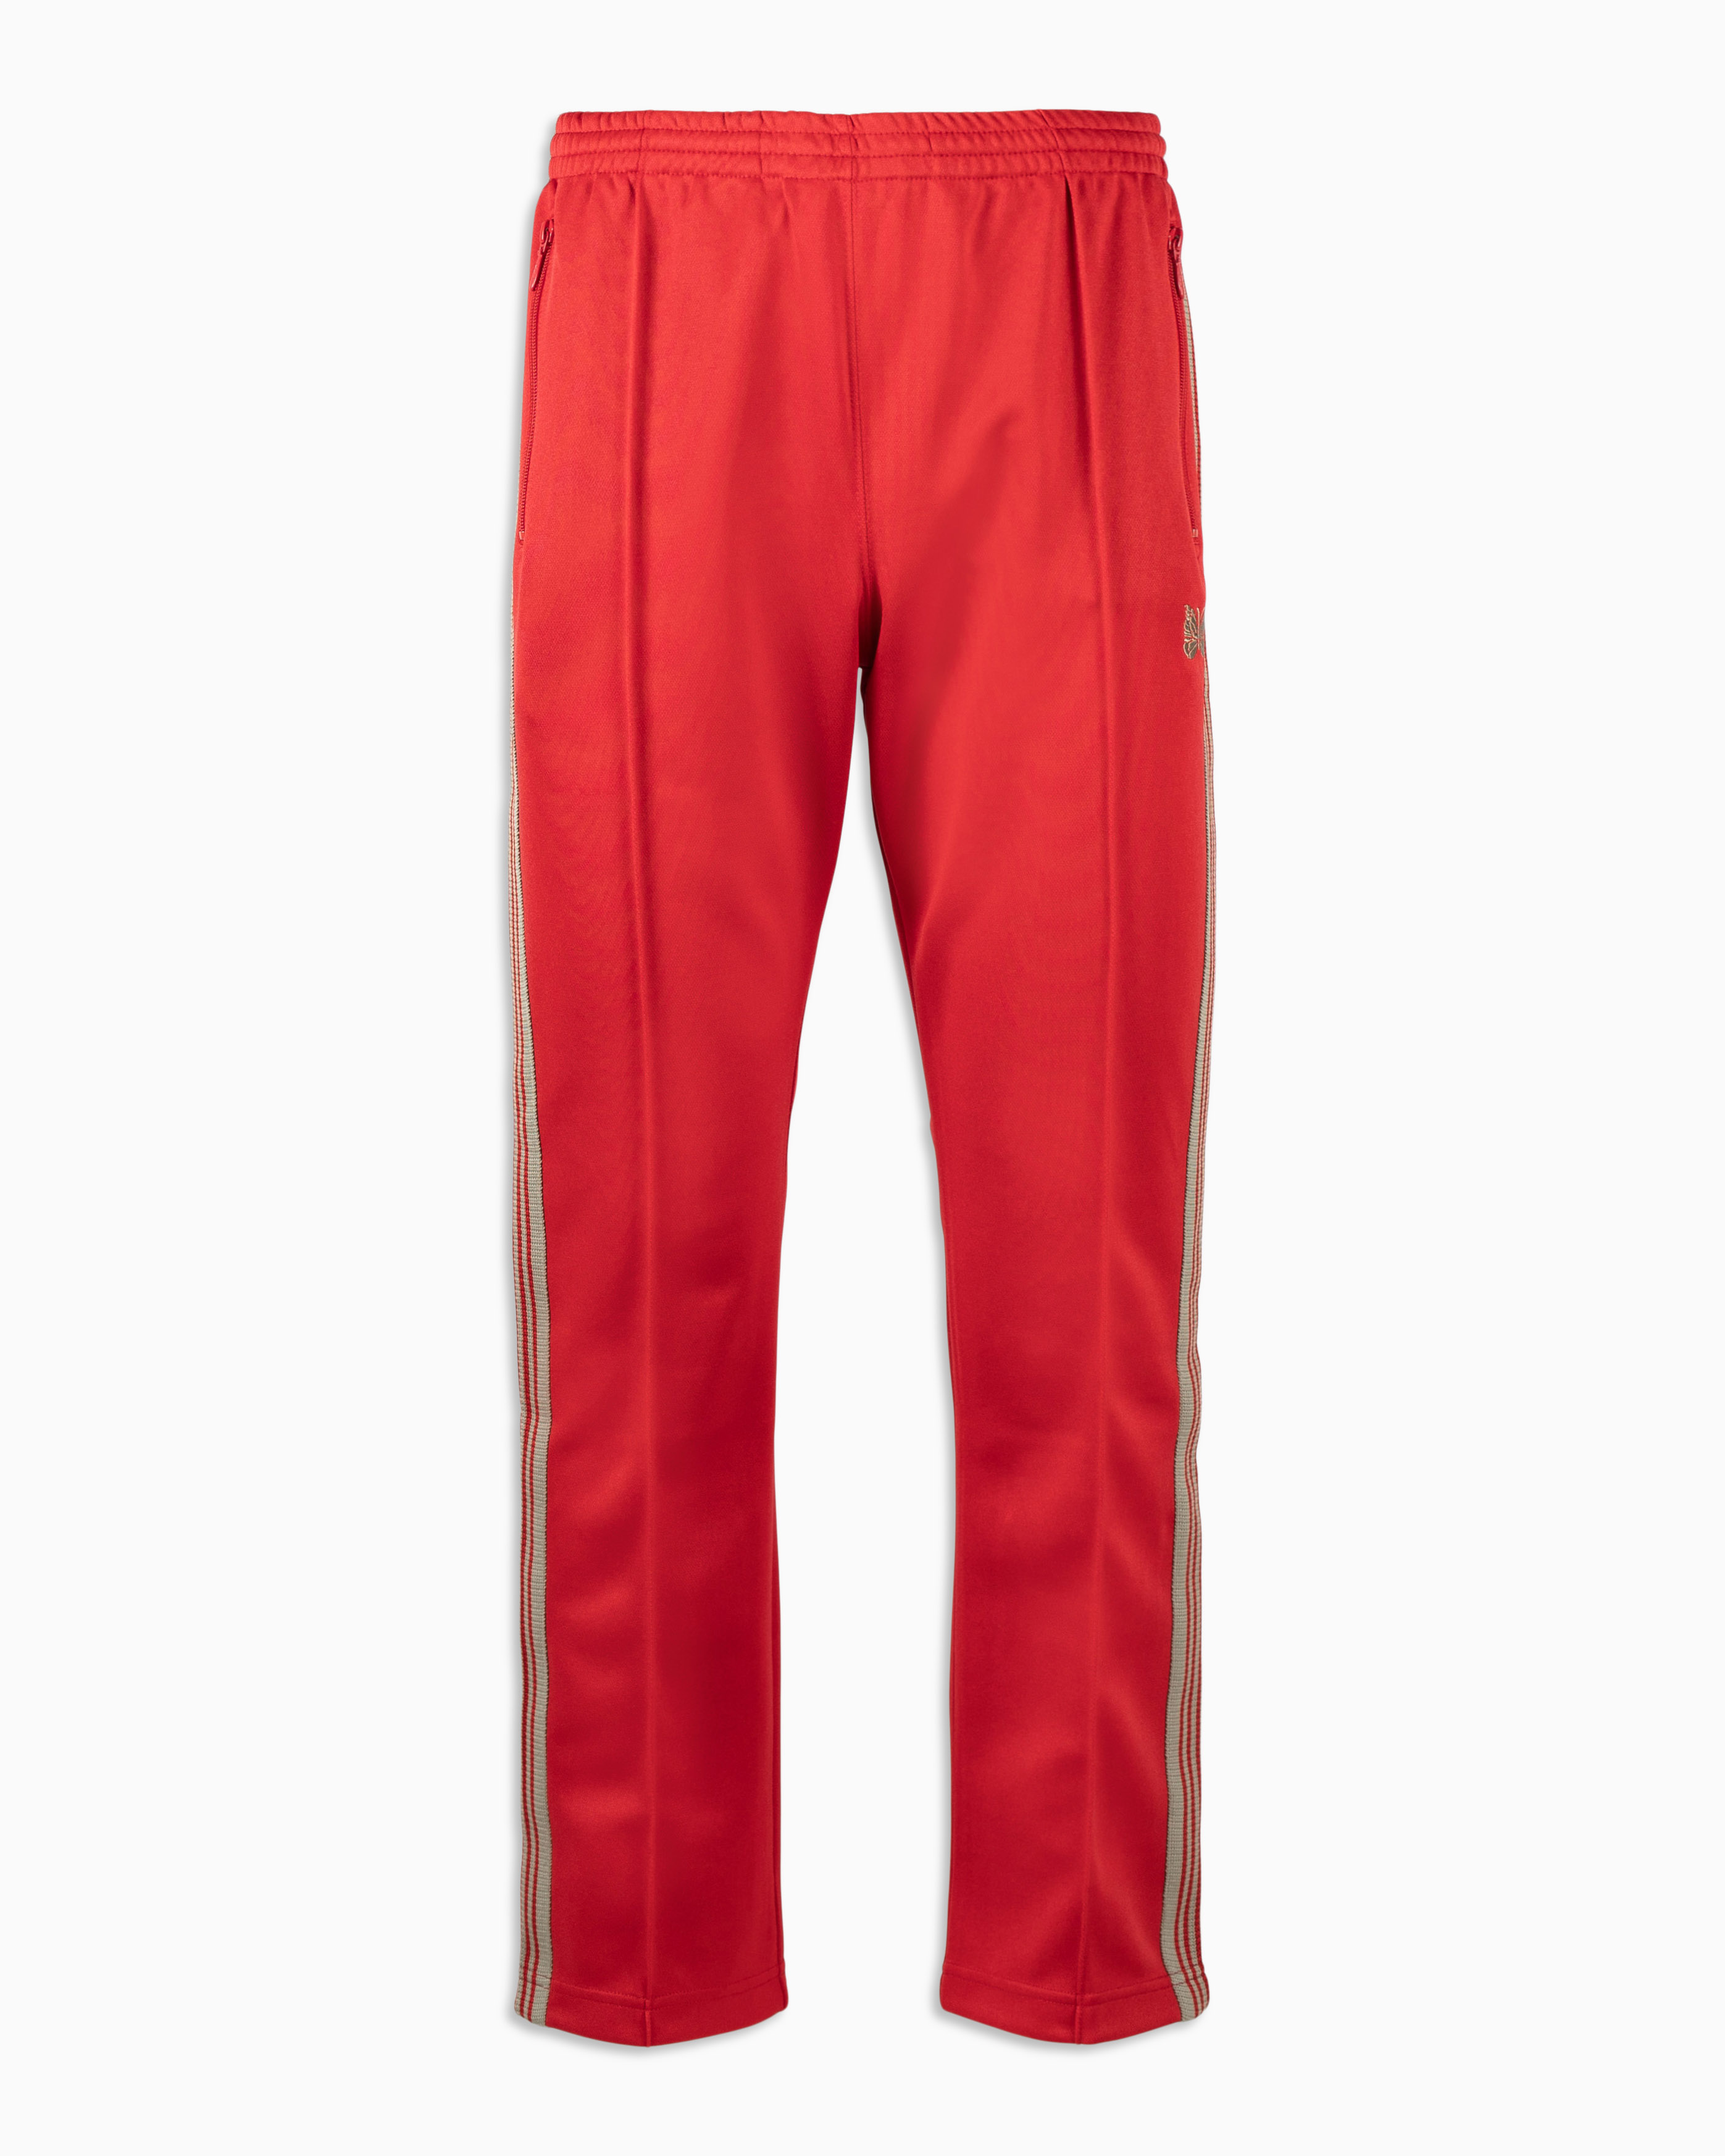 Narrow Track Pant Needles Bottoms Track Pants Red